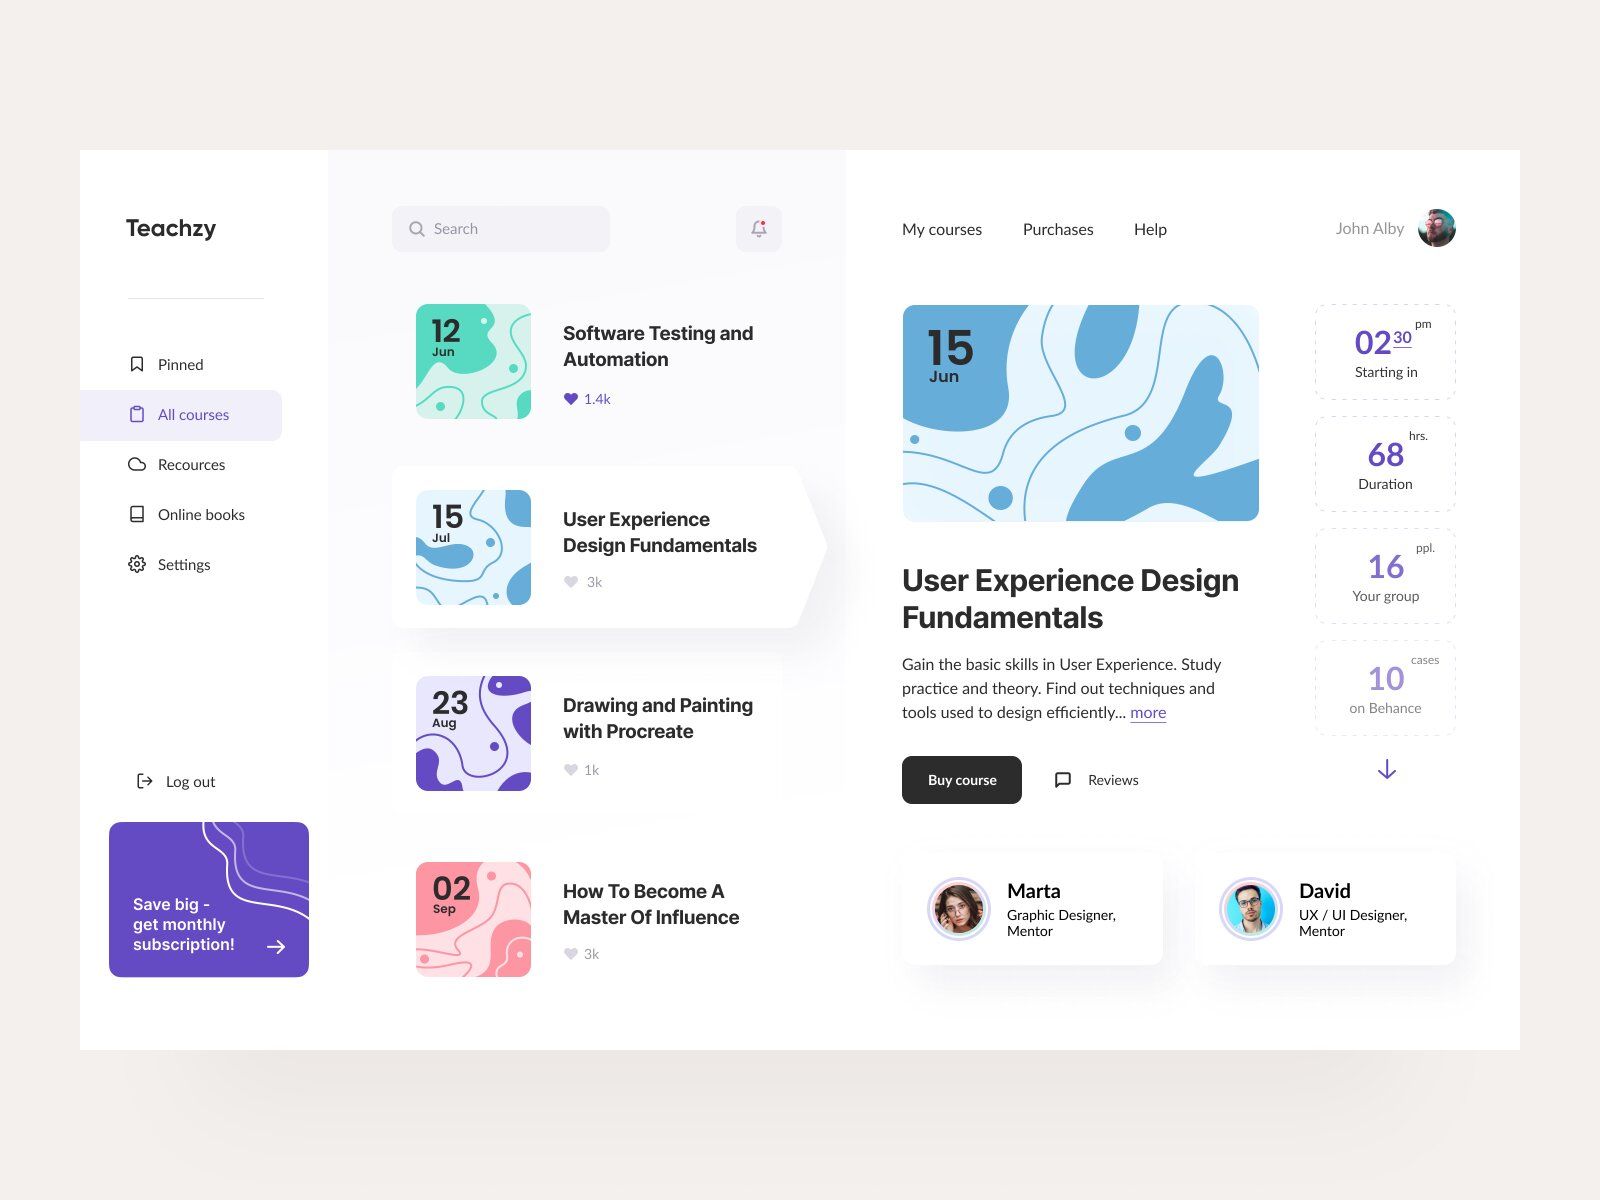 Marketplace website for selling courses (*image by [Daniella](https://dribbble.com/Daniellaa){ rel="nofollow" .default-md}*)